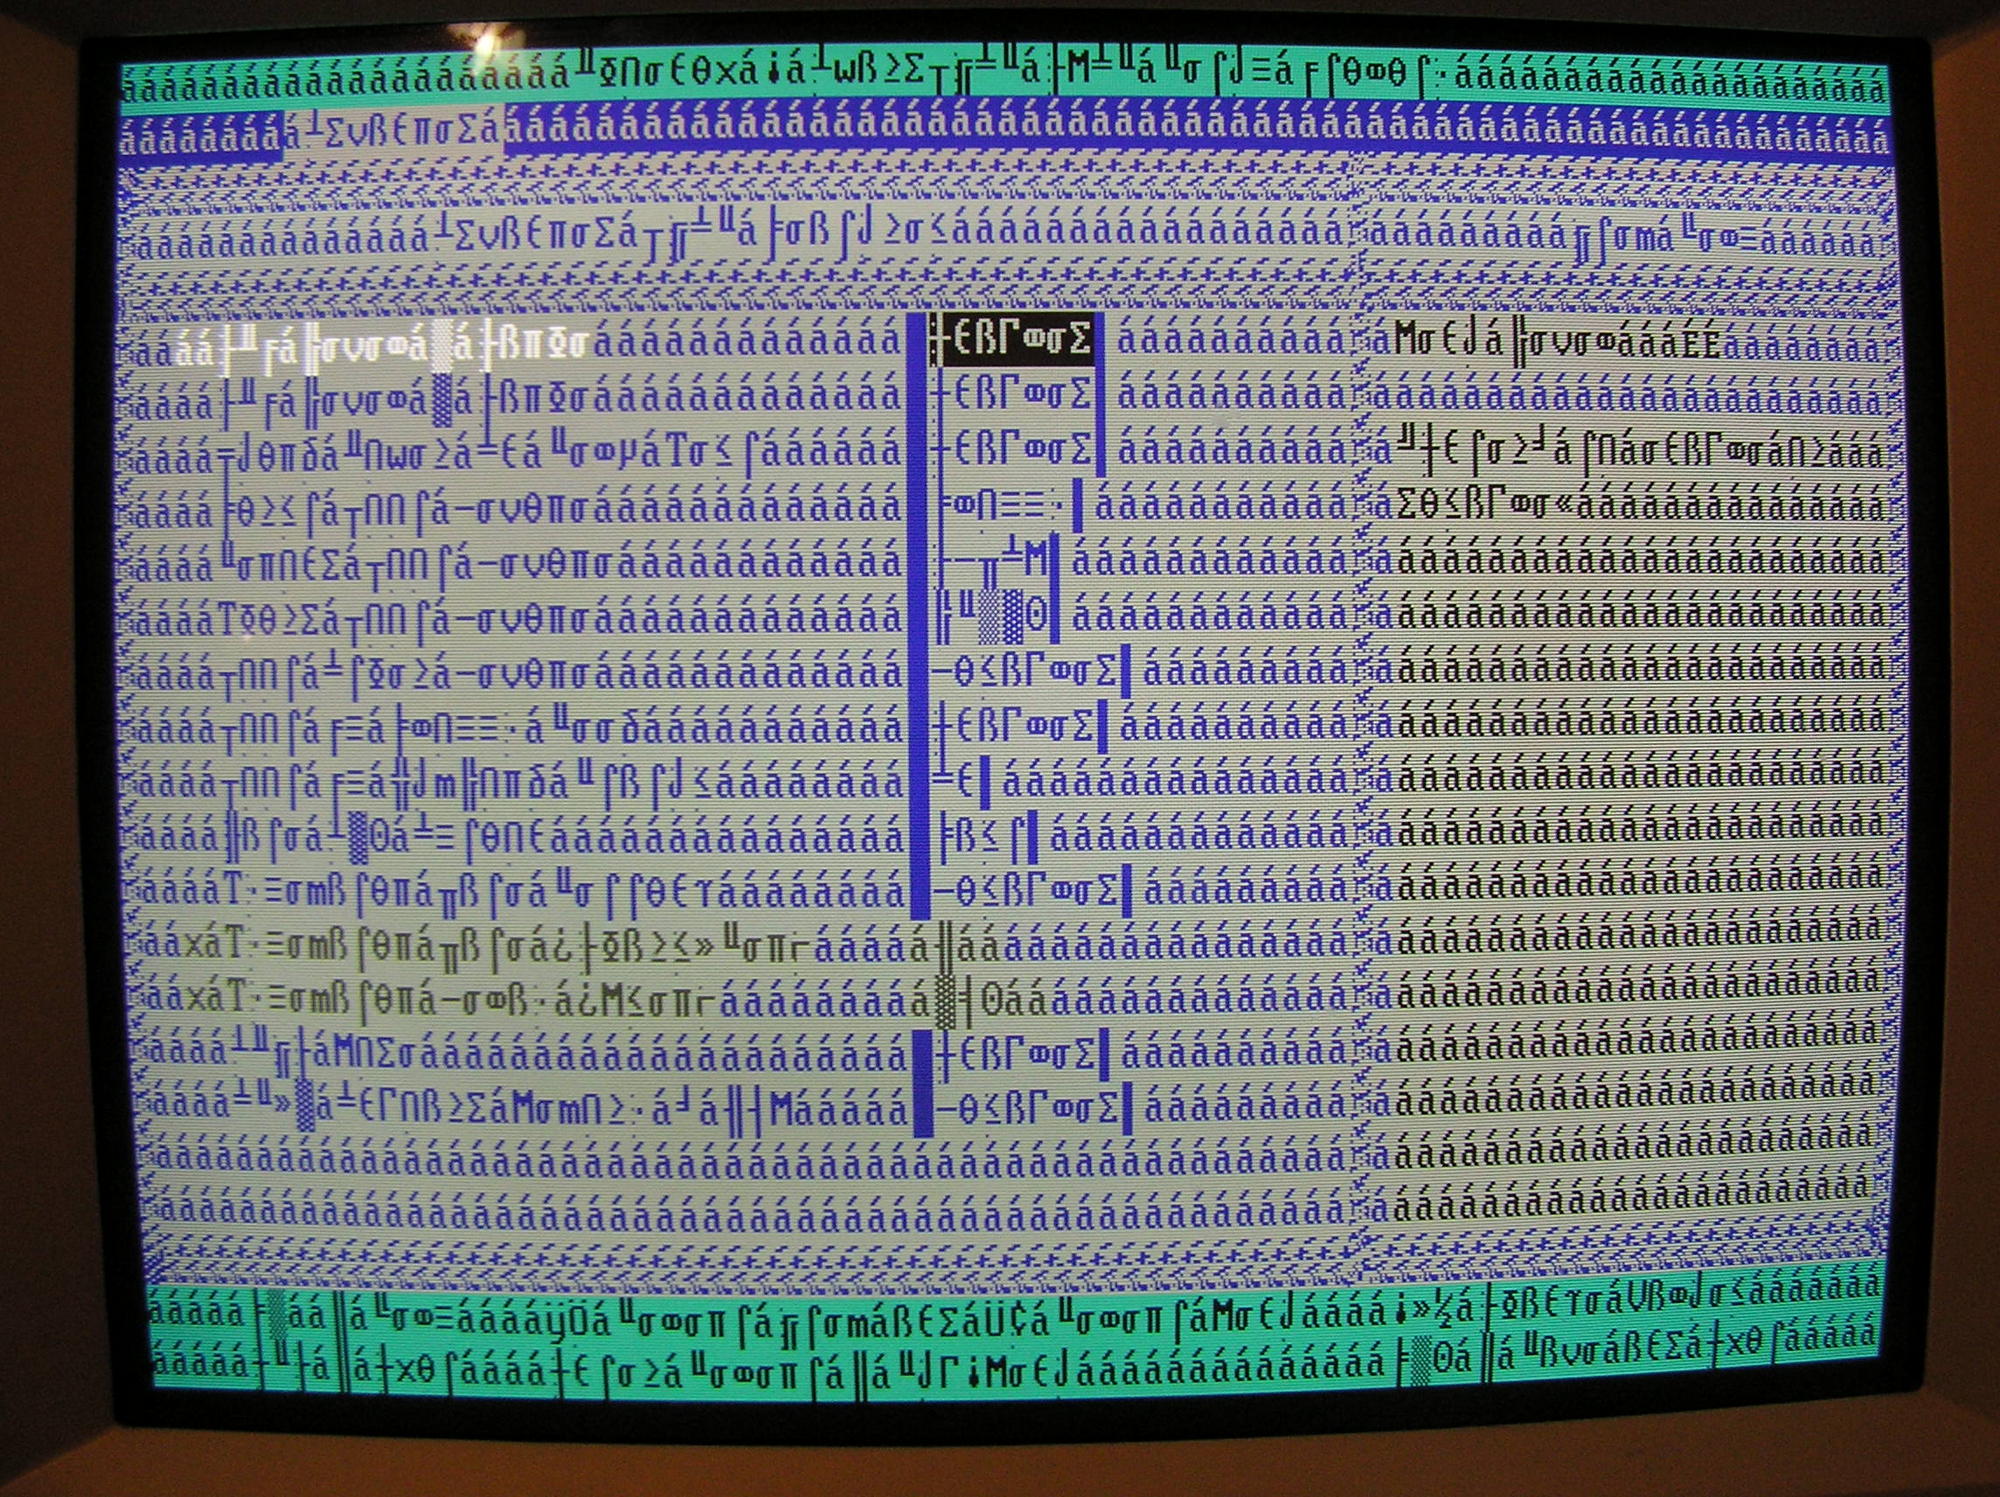 BIOS Moonrunes

When your BIOS looks like this you *might* have a small problem...